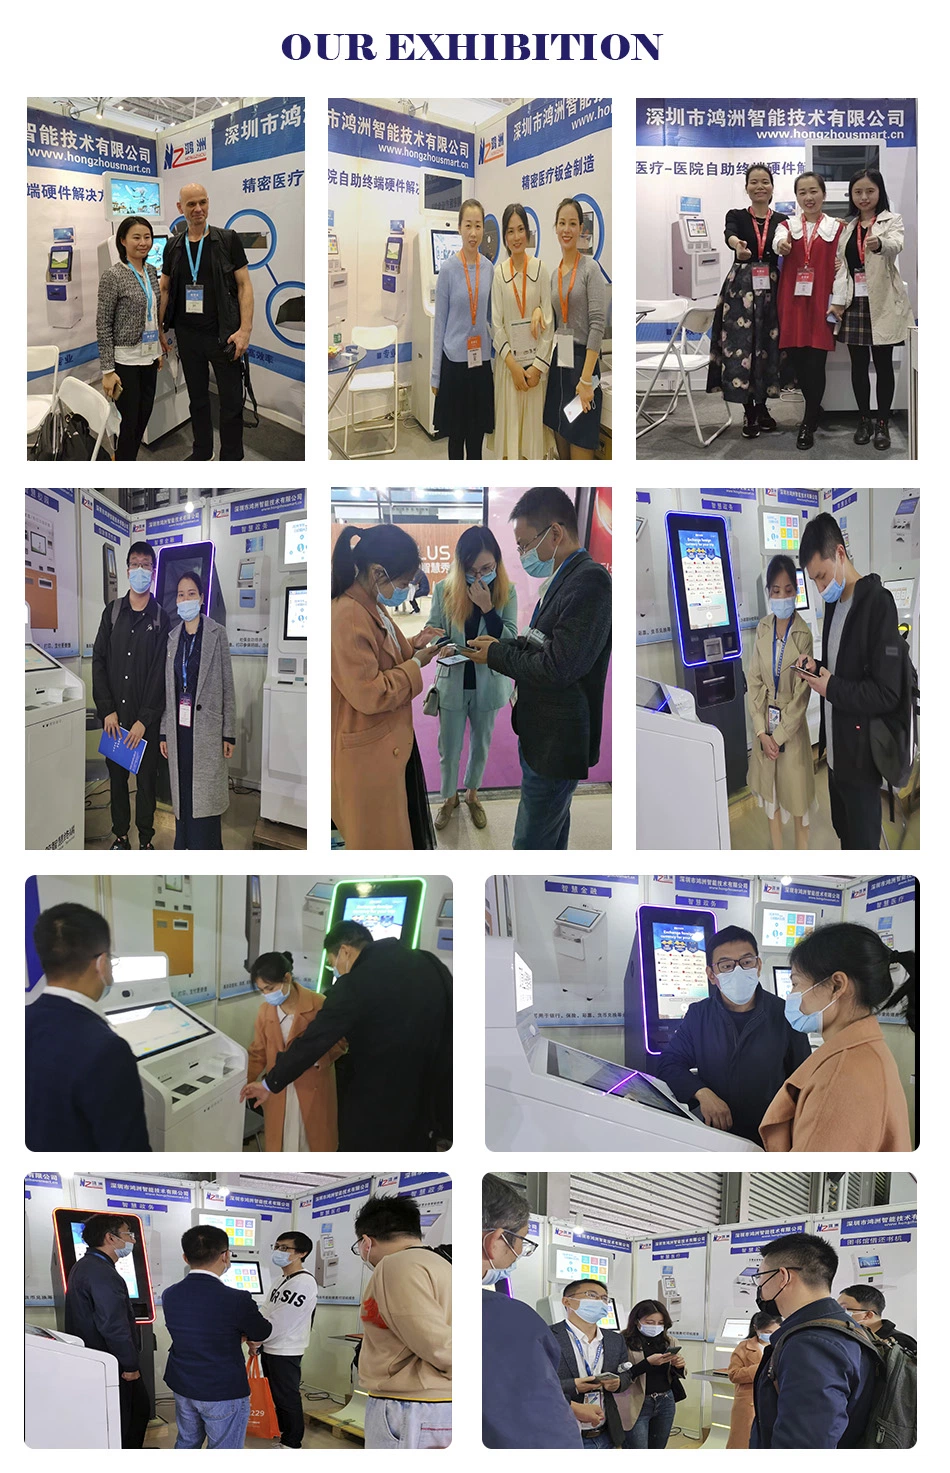 Dual Screen Hotel Check in Machine RFID Card Dispensing Self Registration Kiosk with Facial Recognition Camera